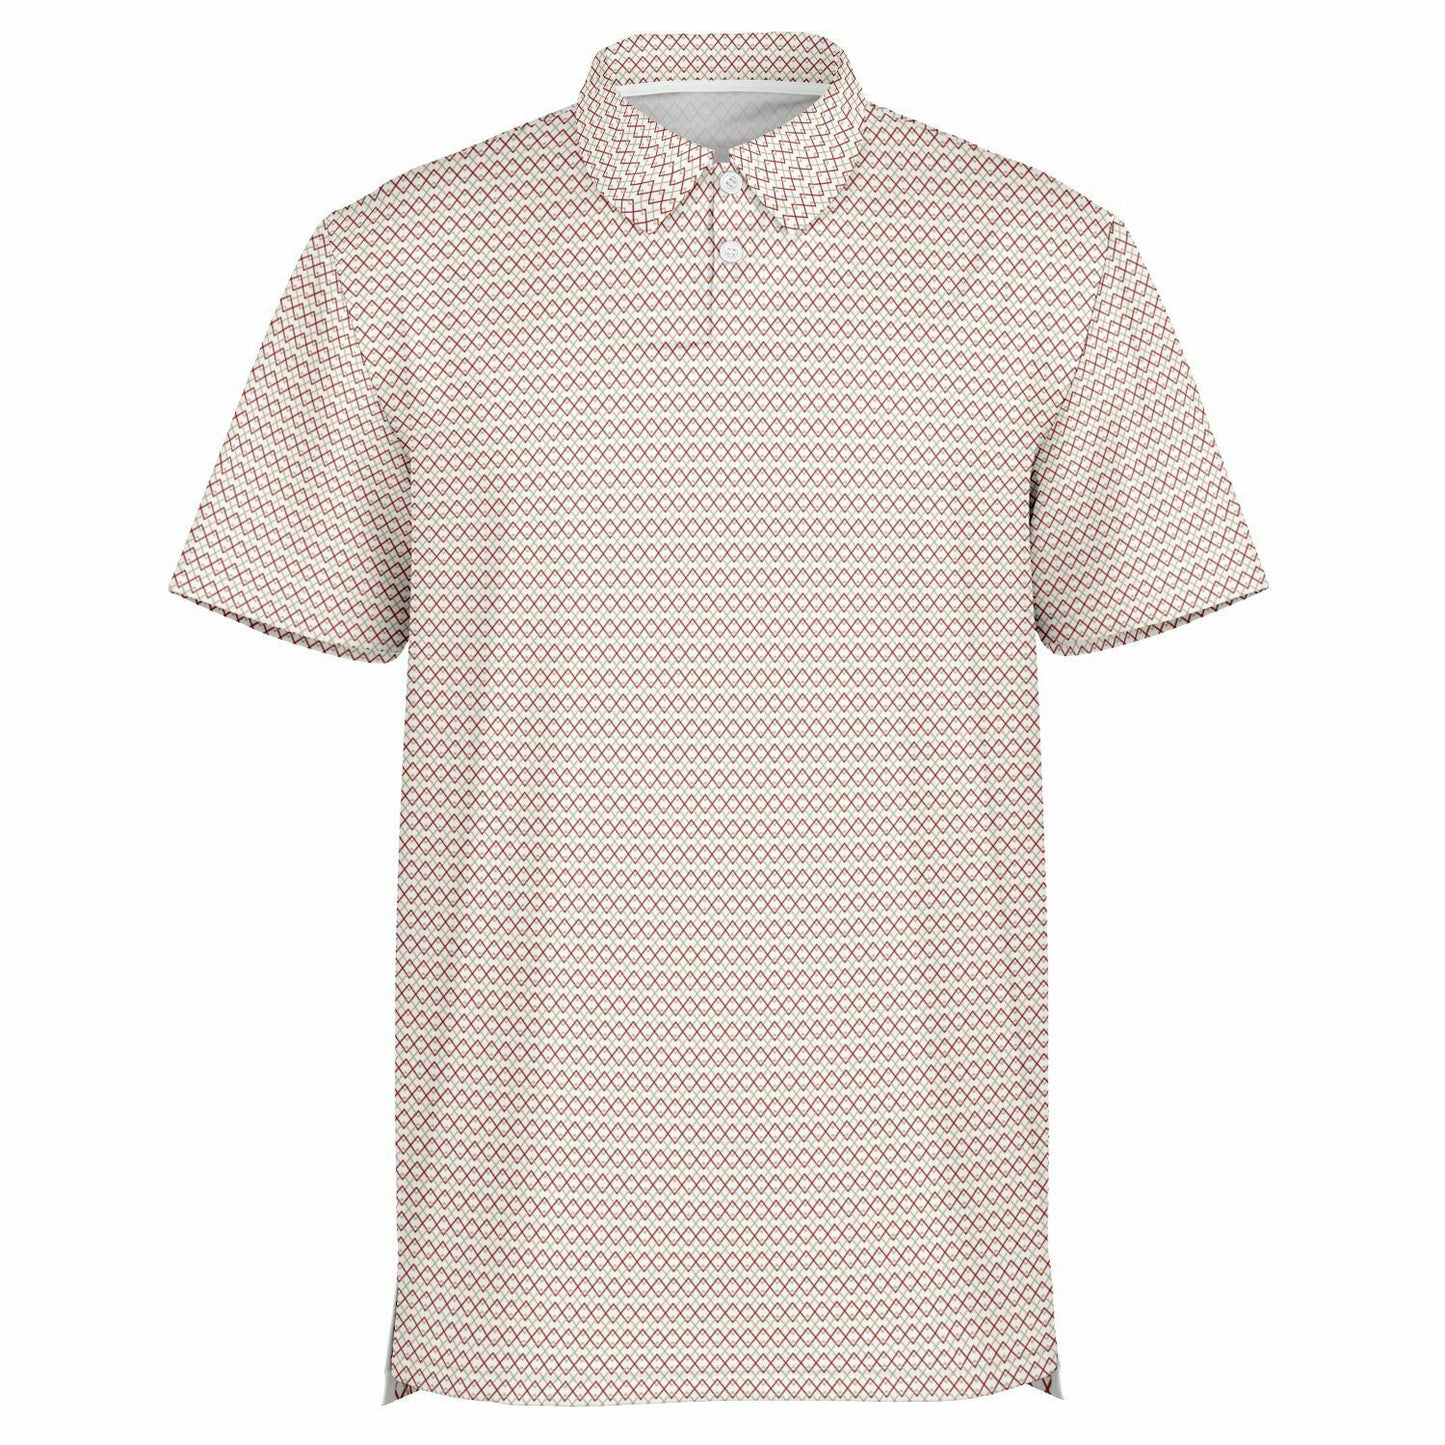 Zigs Spring Performance Polo